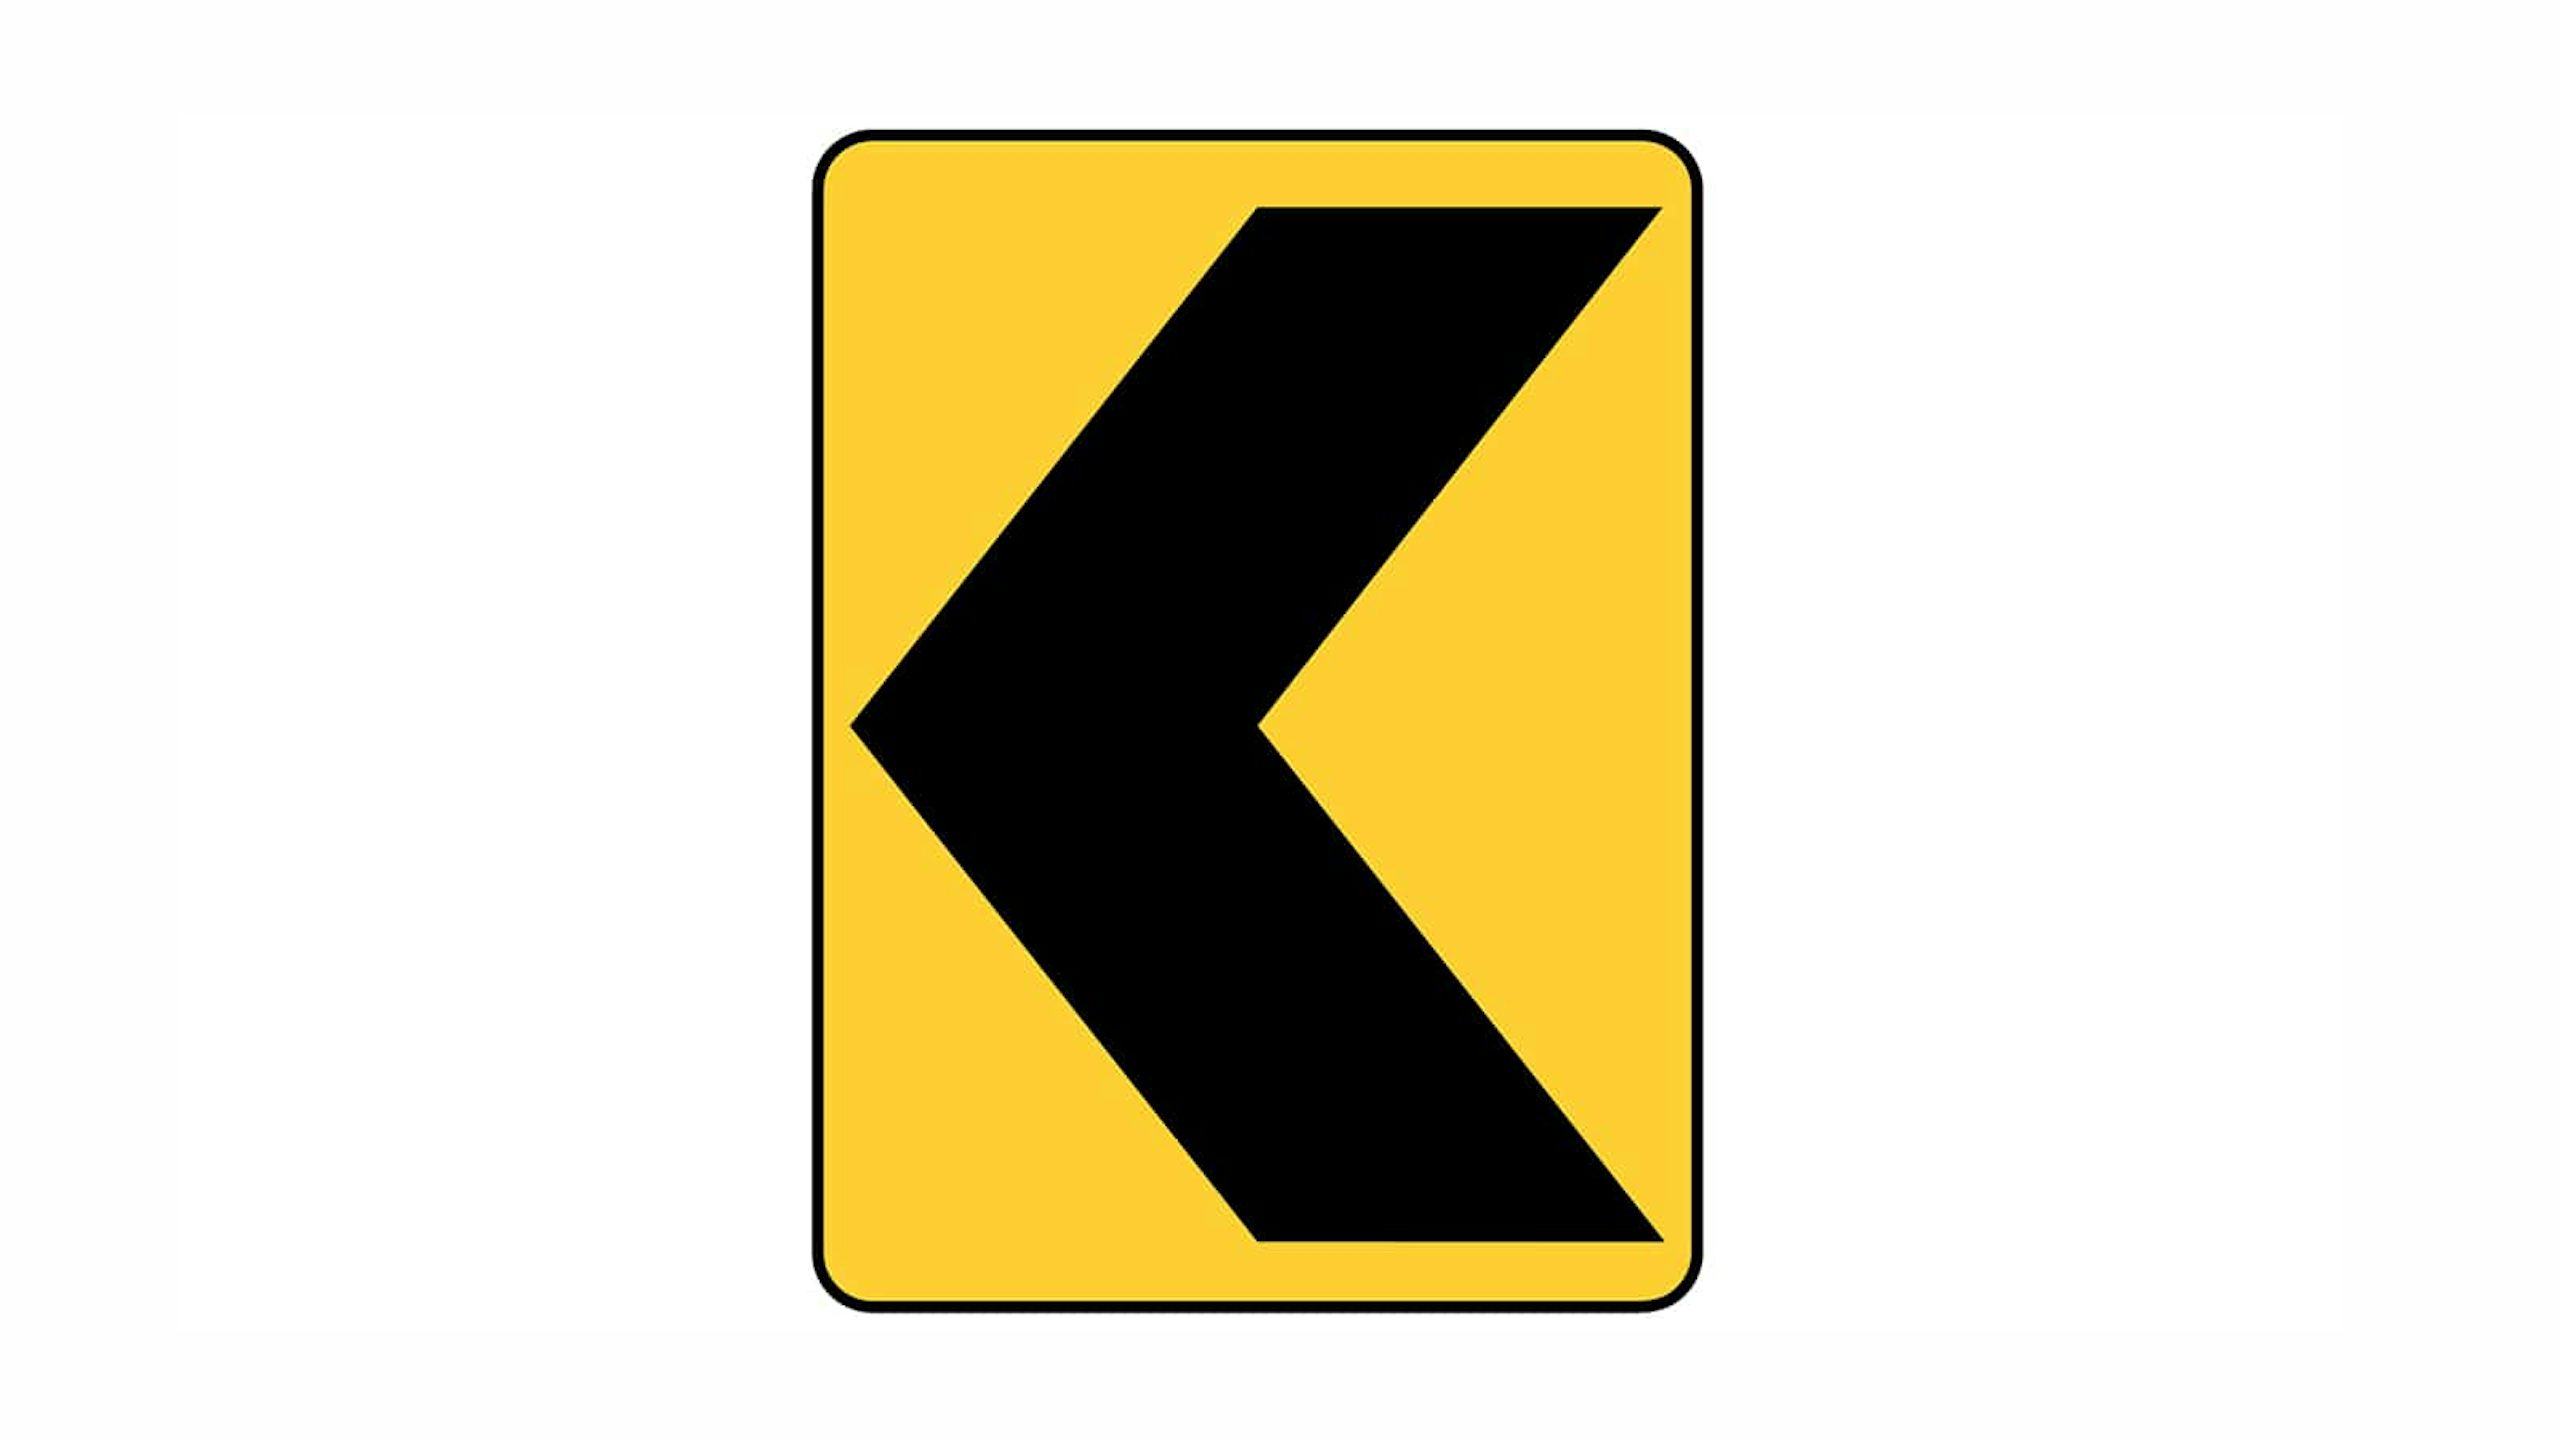 With only one left, iconic yellow road sign showing running